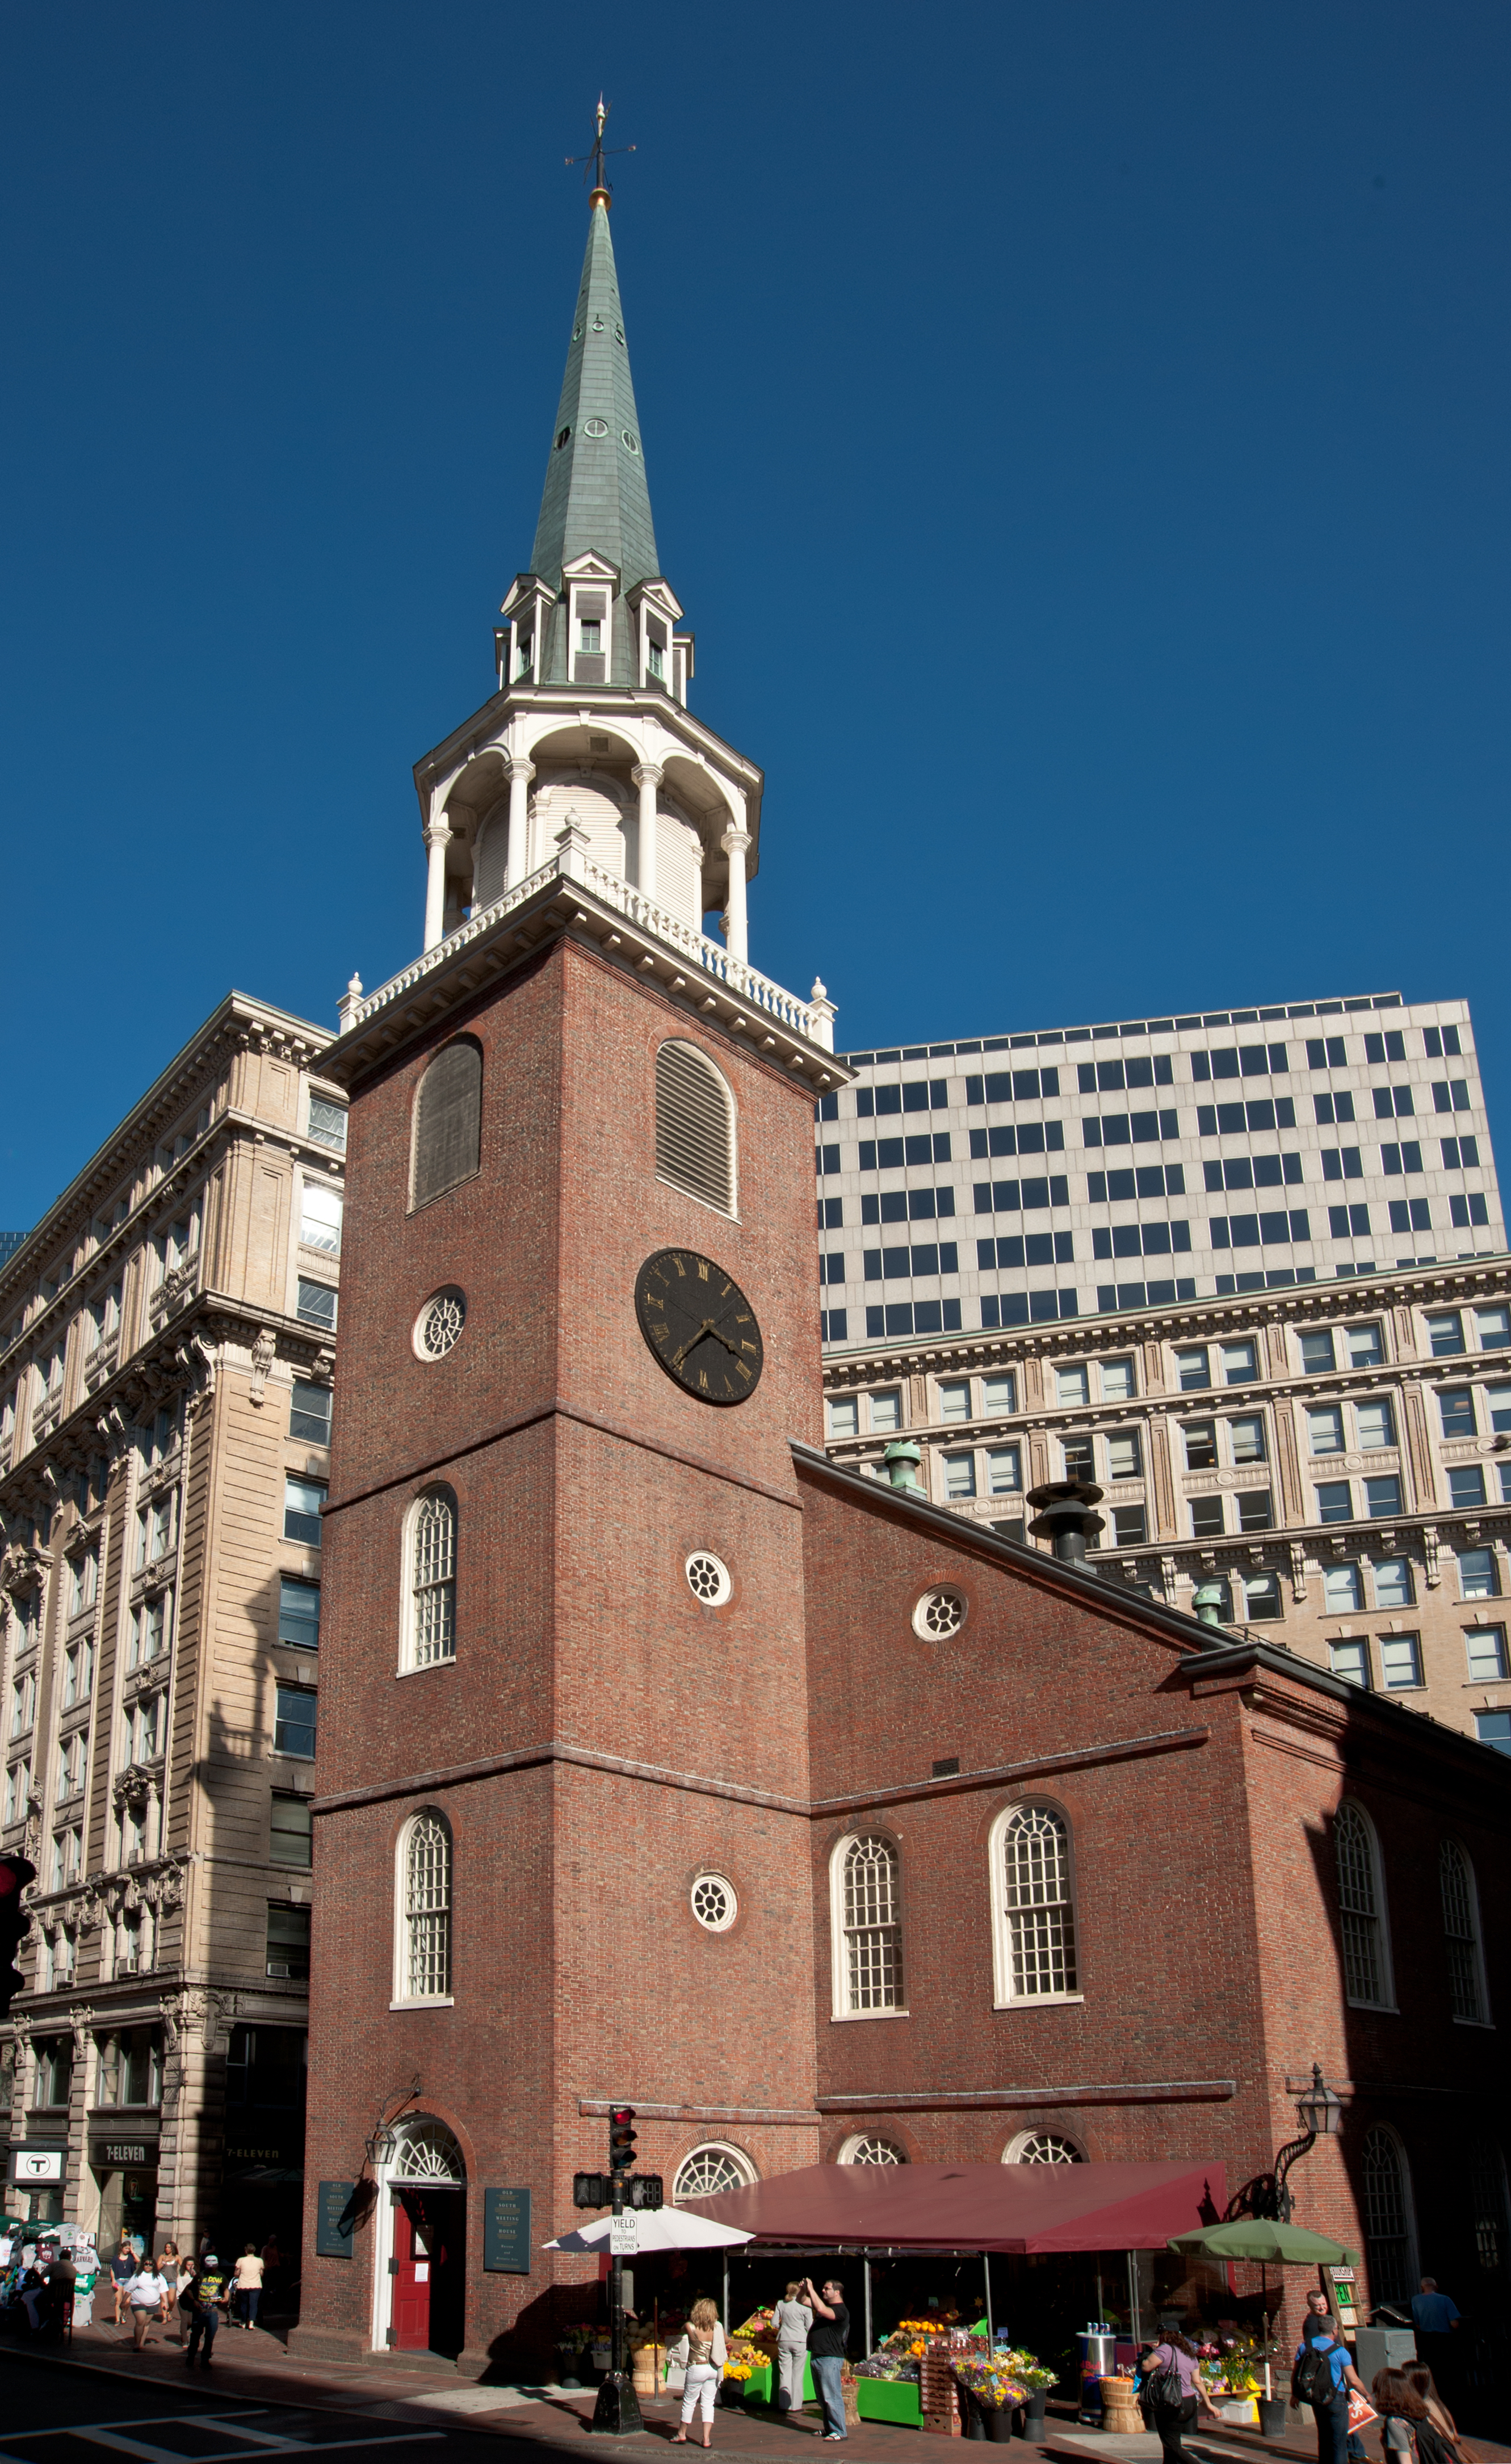 Exterior of Old South Meeting House. Image courtesy of Fayfoto, www.fayfoto.com